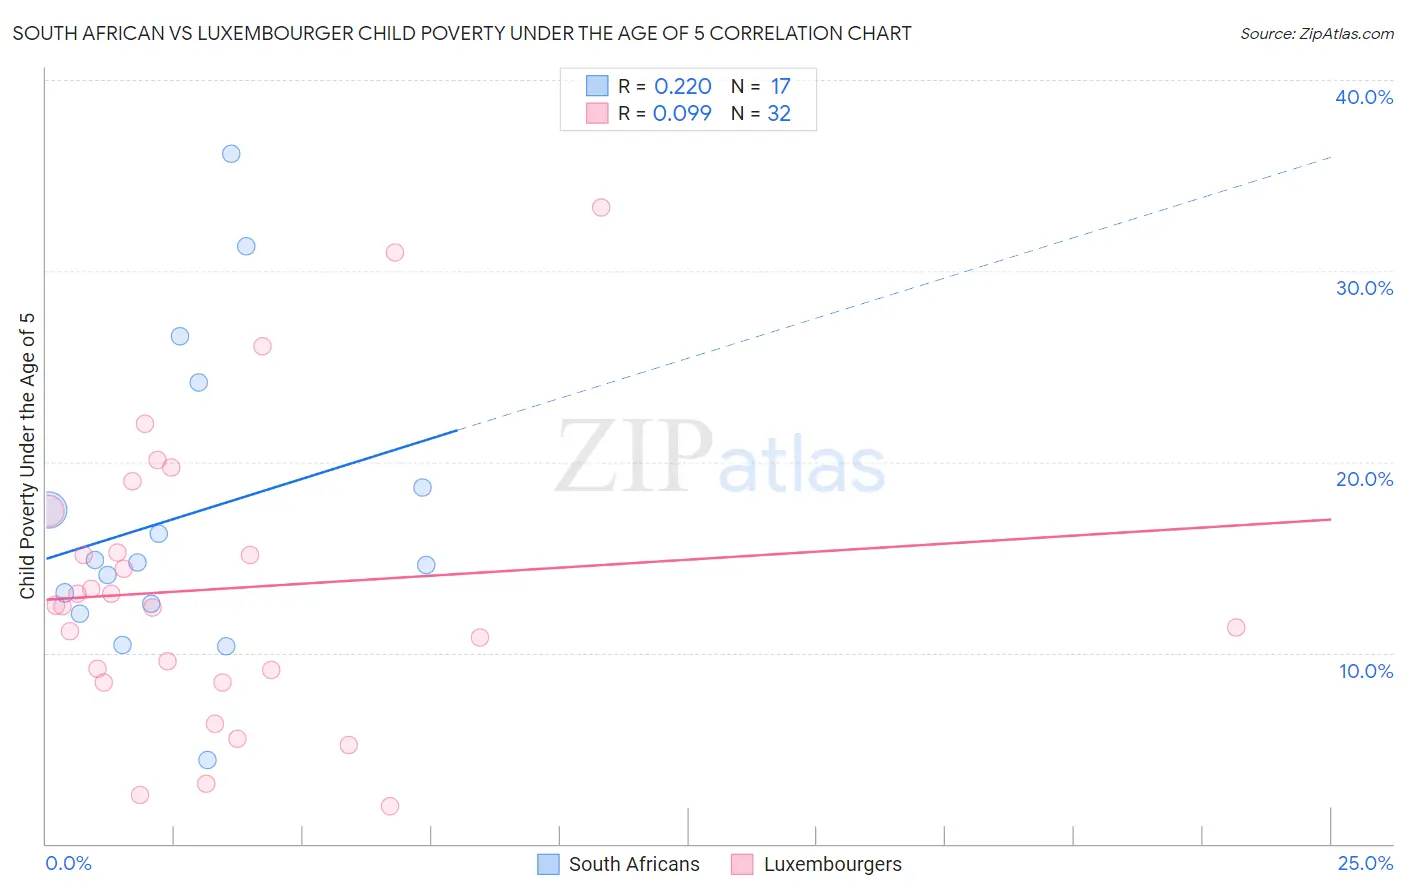 South African vs Luxembourger Child Poverty Under the Age of 5